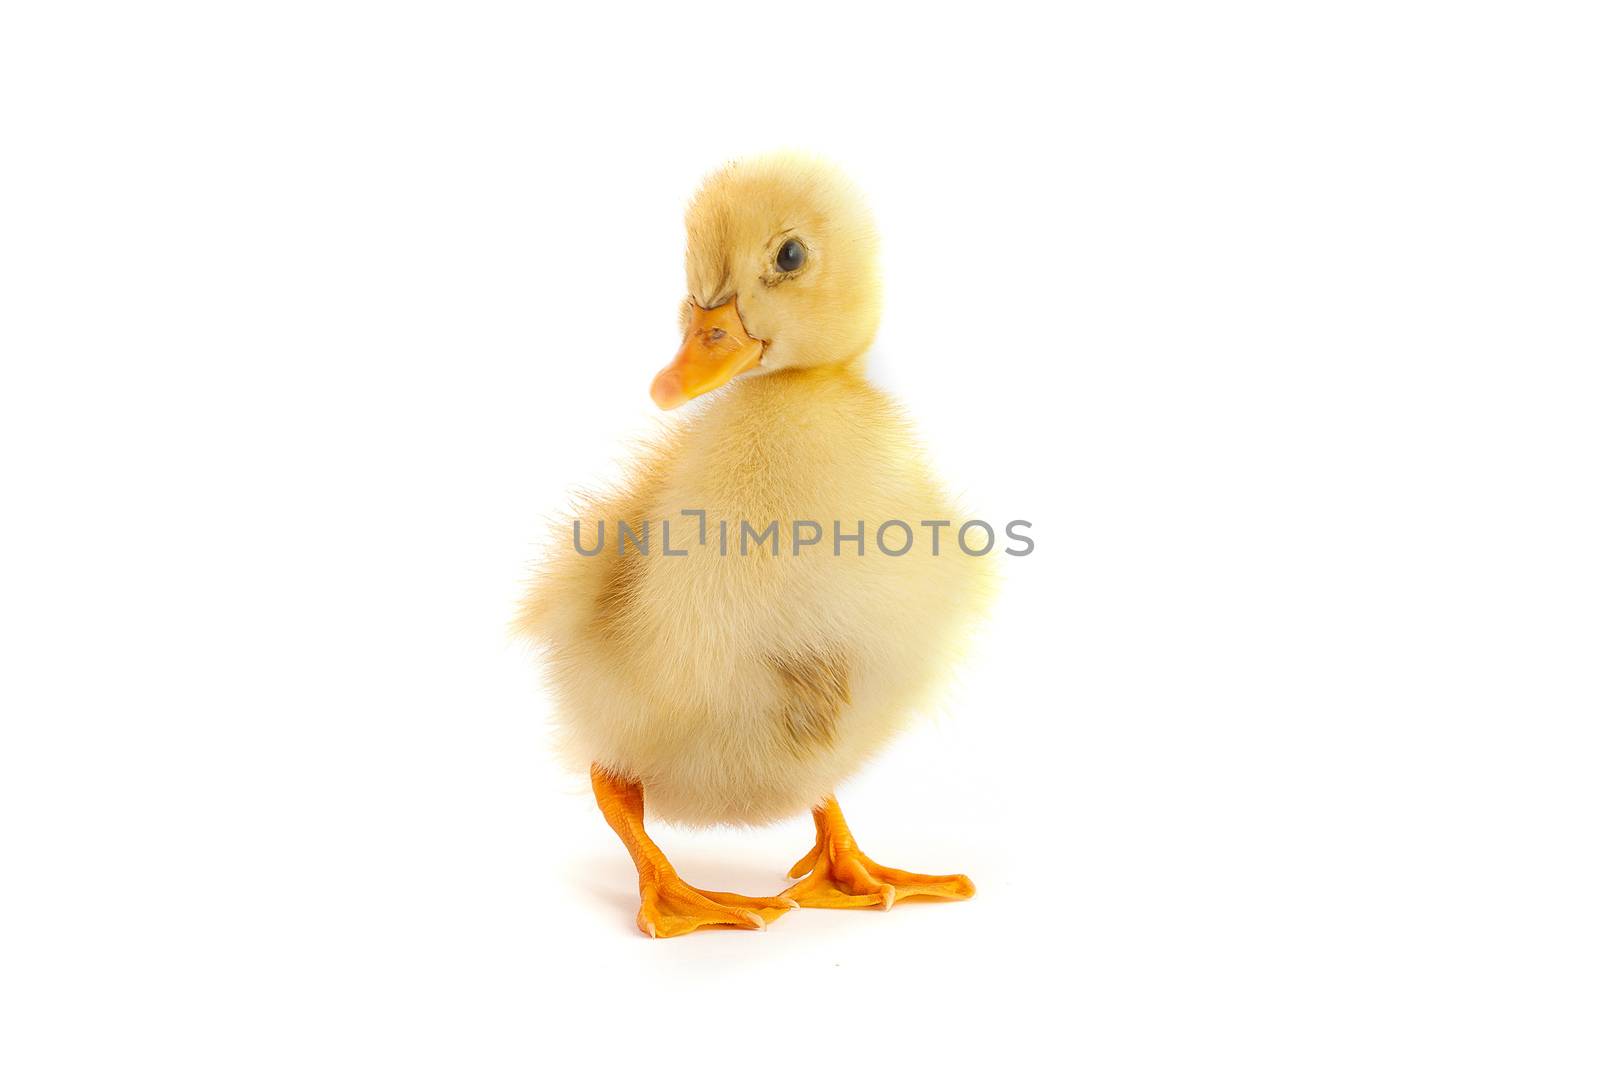 A yellow duckling isolated on a white background by bloodua